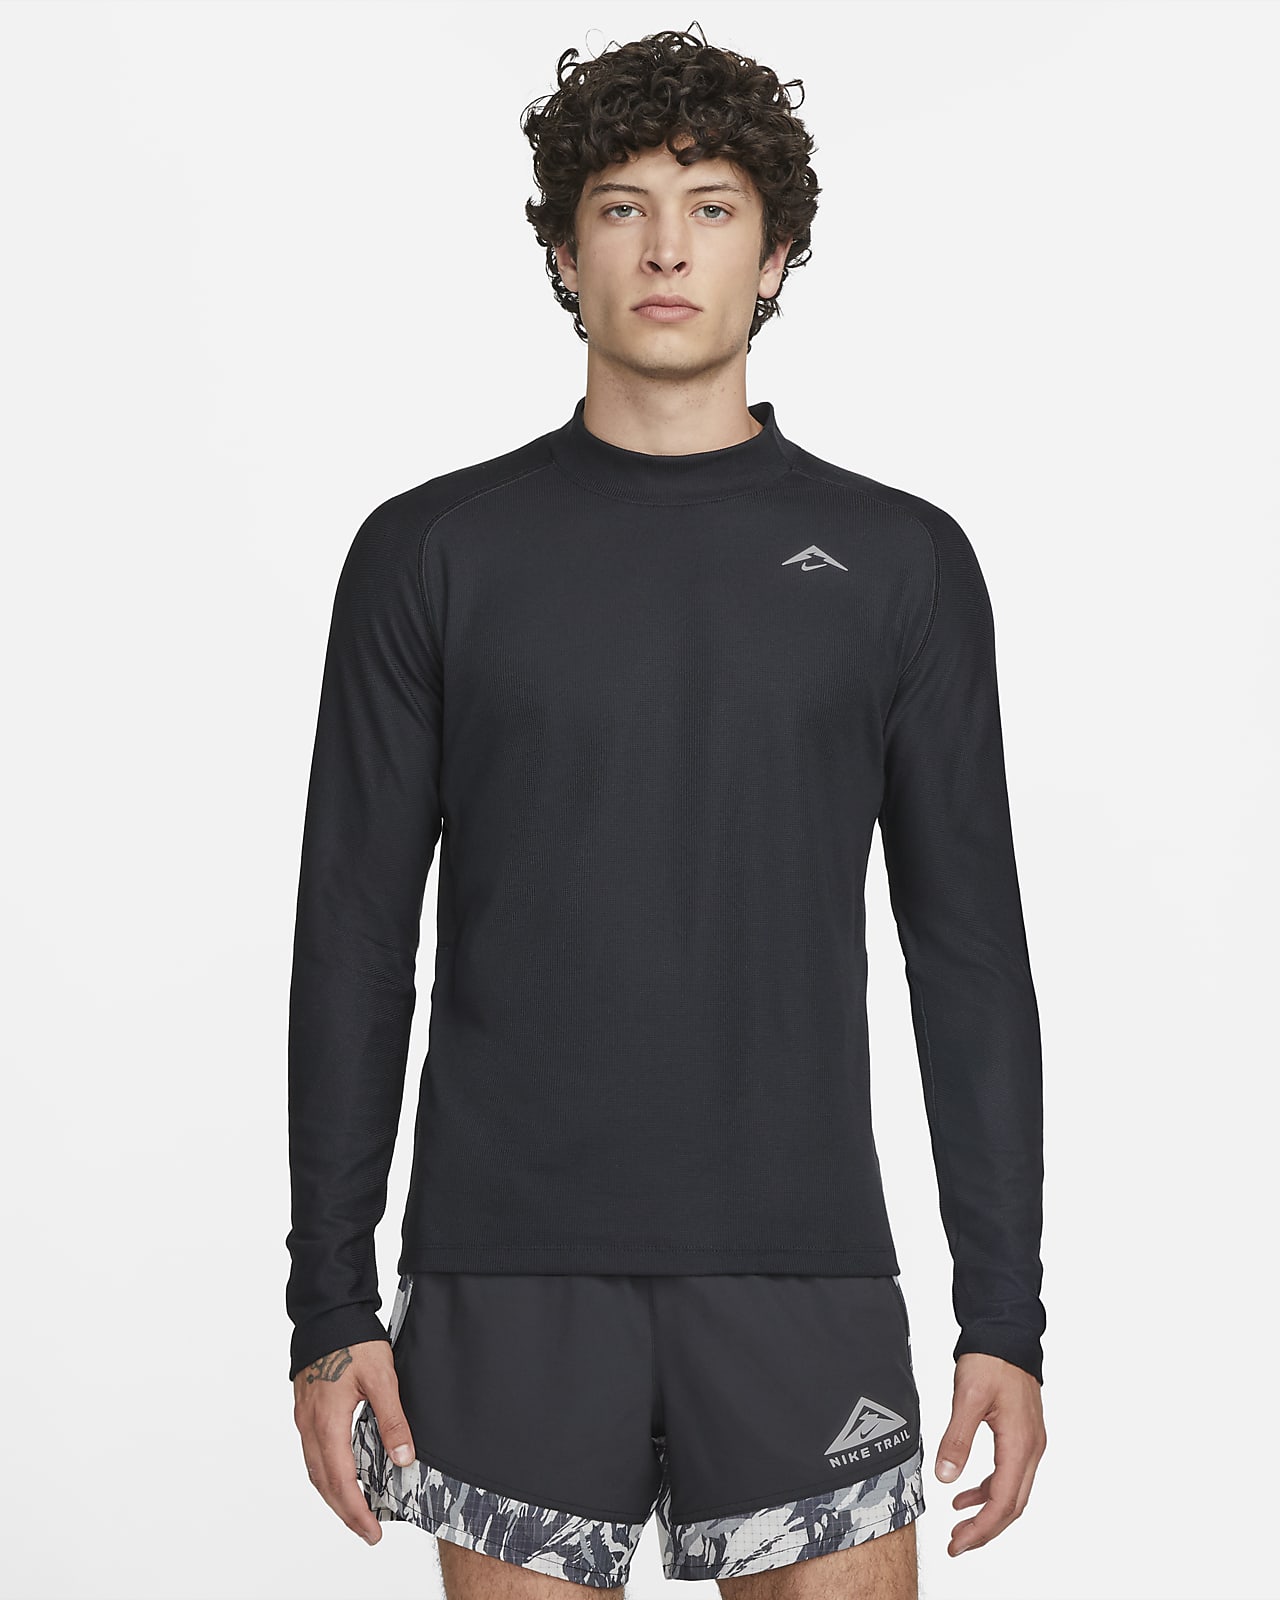 https://static.nike.com/a/images/t_PDP_1280_v1/f_auto,q_auto:eco/403c85b3-3452-4247-b504-78f9915a235a/trail-mens-dri-fit-long-sleeve-running-top-6Zv43p.png